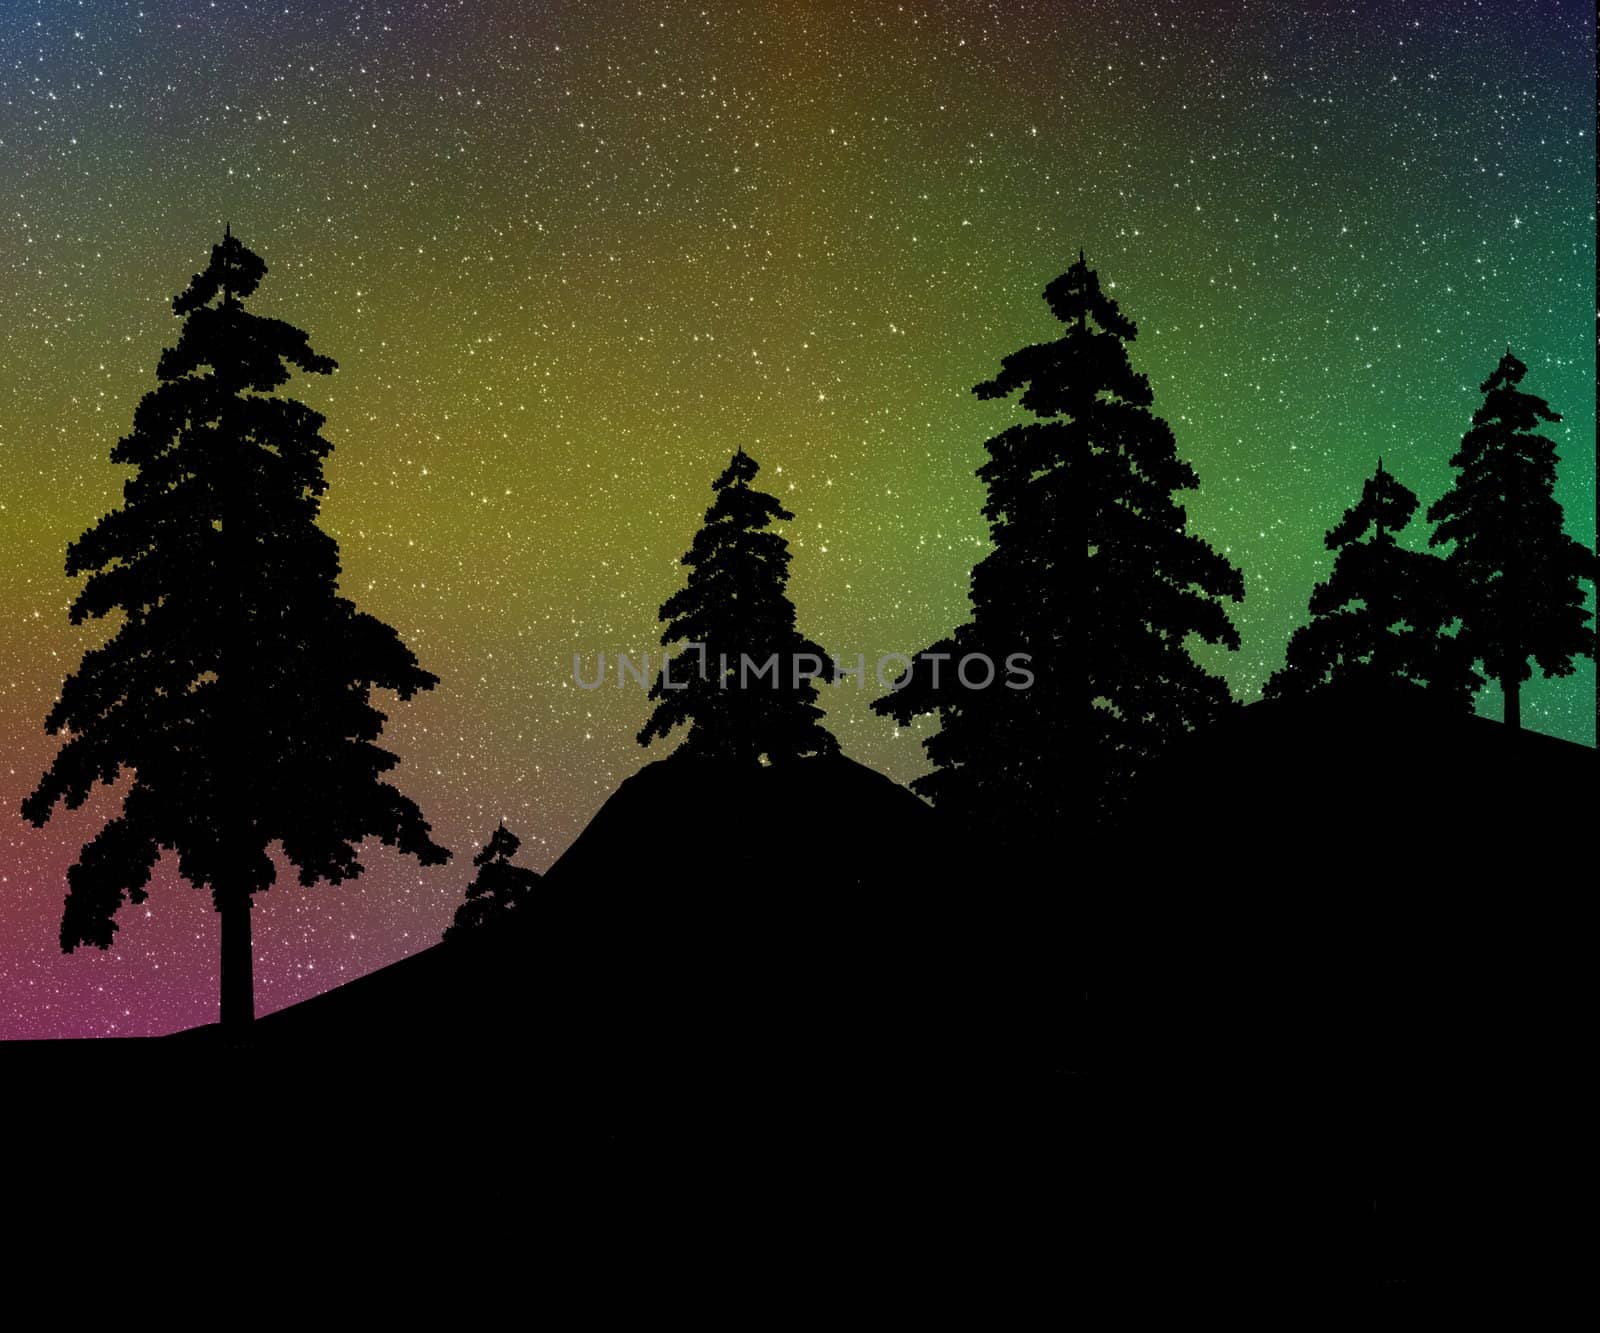 Colorful northern lights over a silhouetted quiet pine forest - a raster illustration.